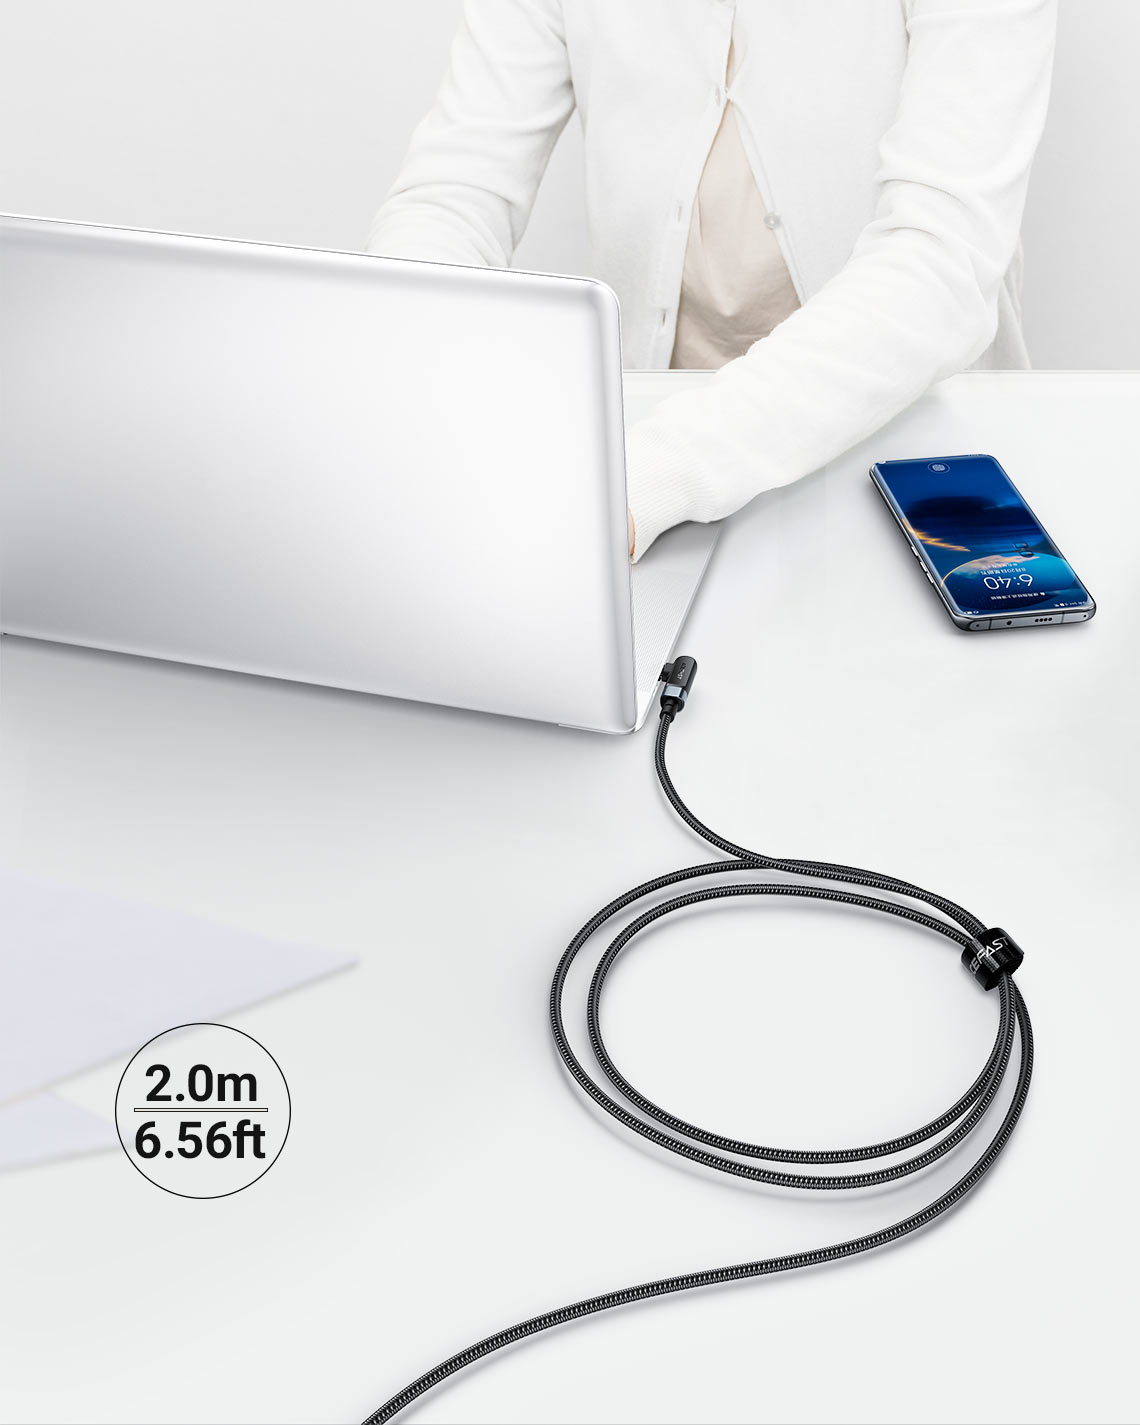 ACEFAST C5 03 100W USB C to USB C Charging Data Cable 2M 9